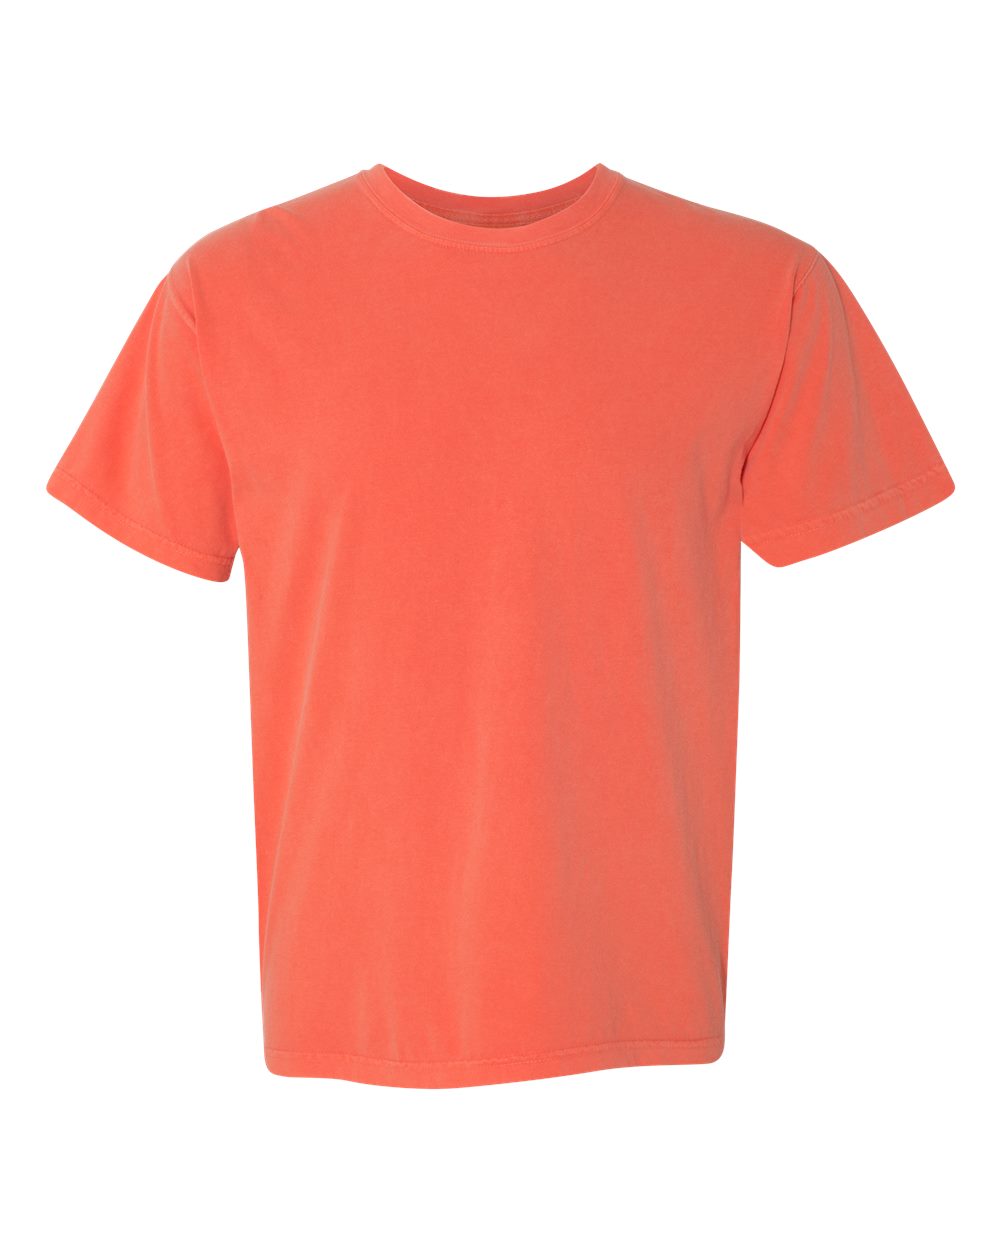 Comfort Colors Garment-Dyed Tee (1717) in Bright Salmon